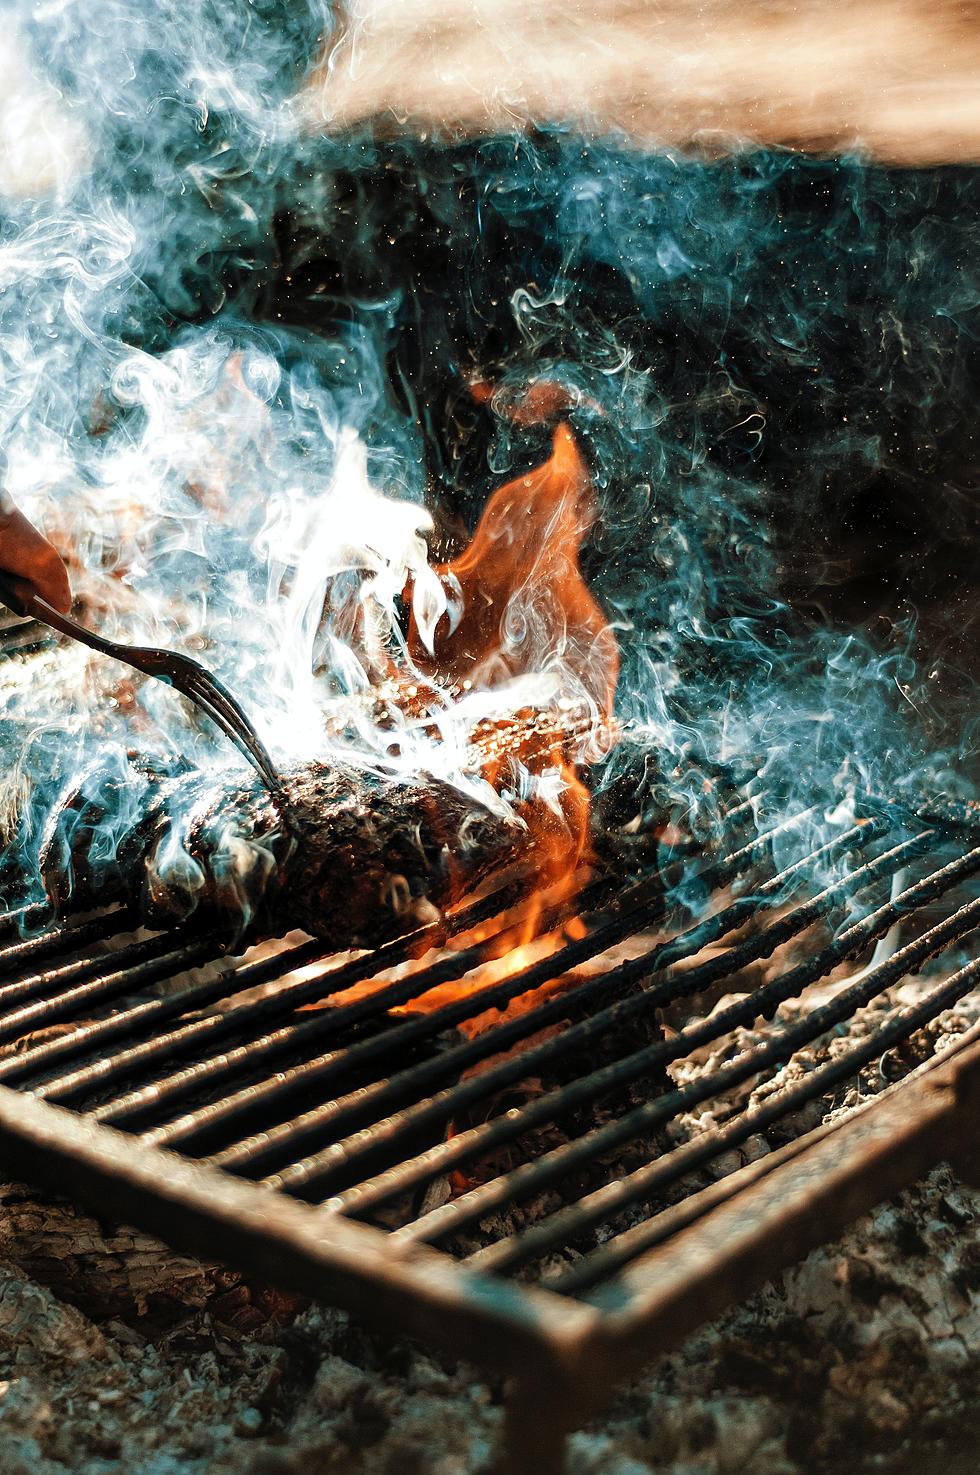 Your Next Barbeque Could Lead To A Trip To The E.R.